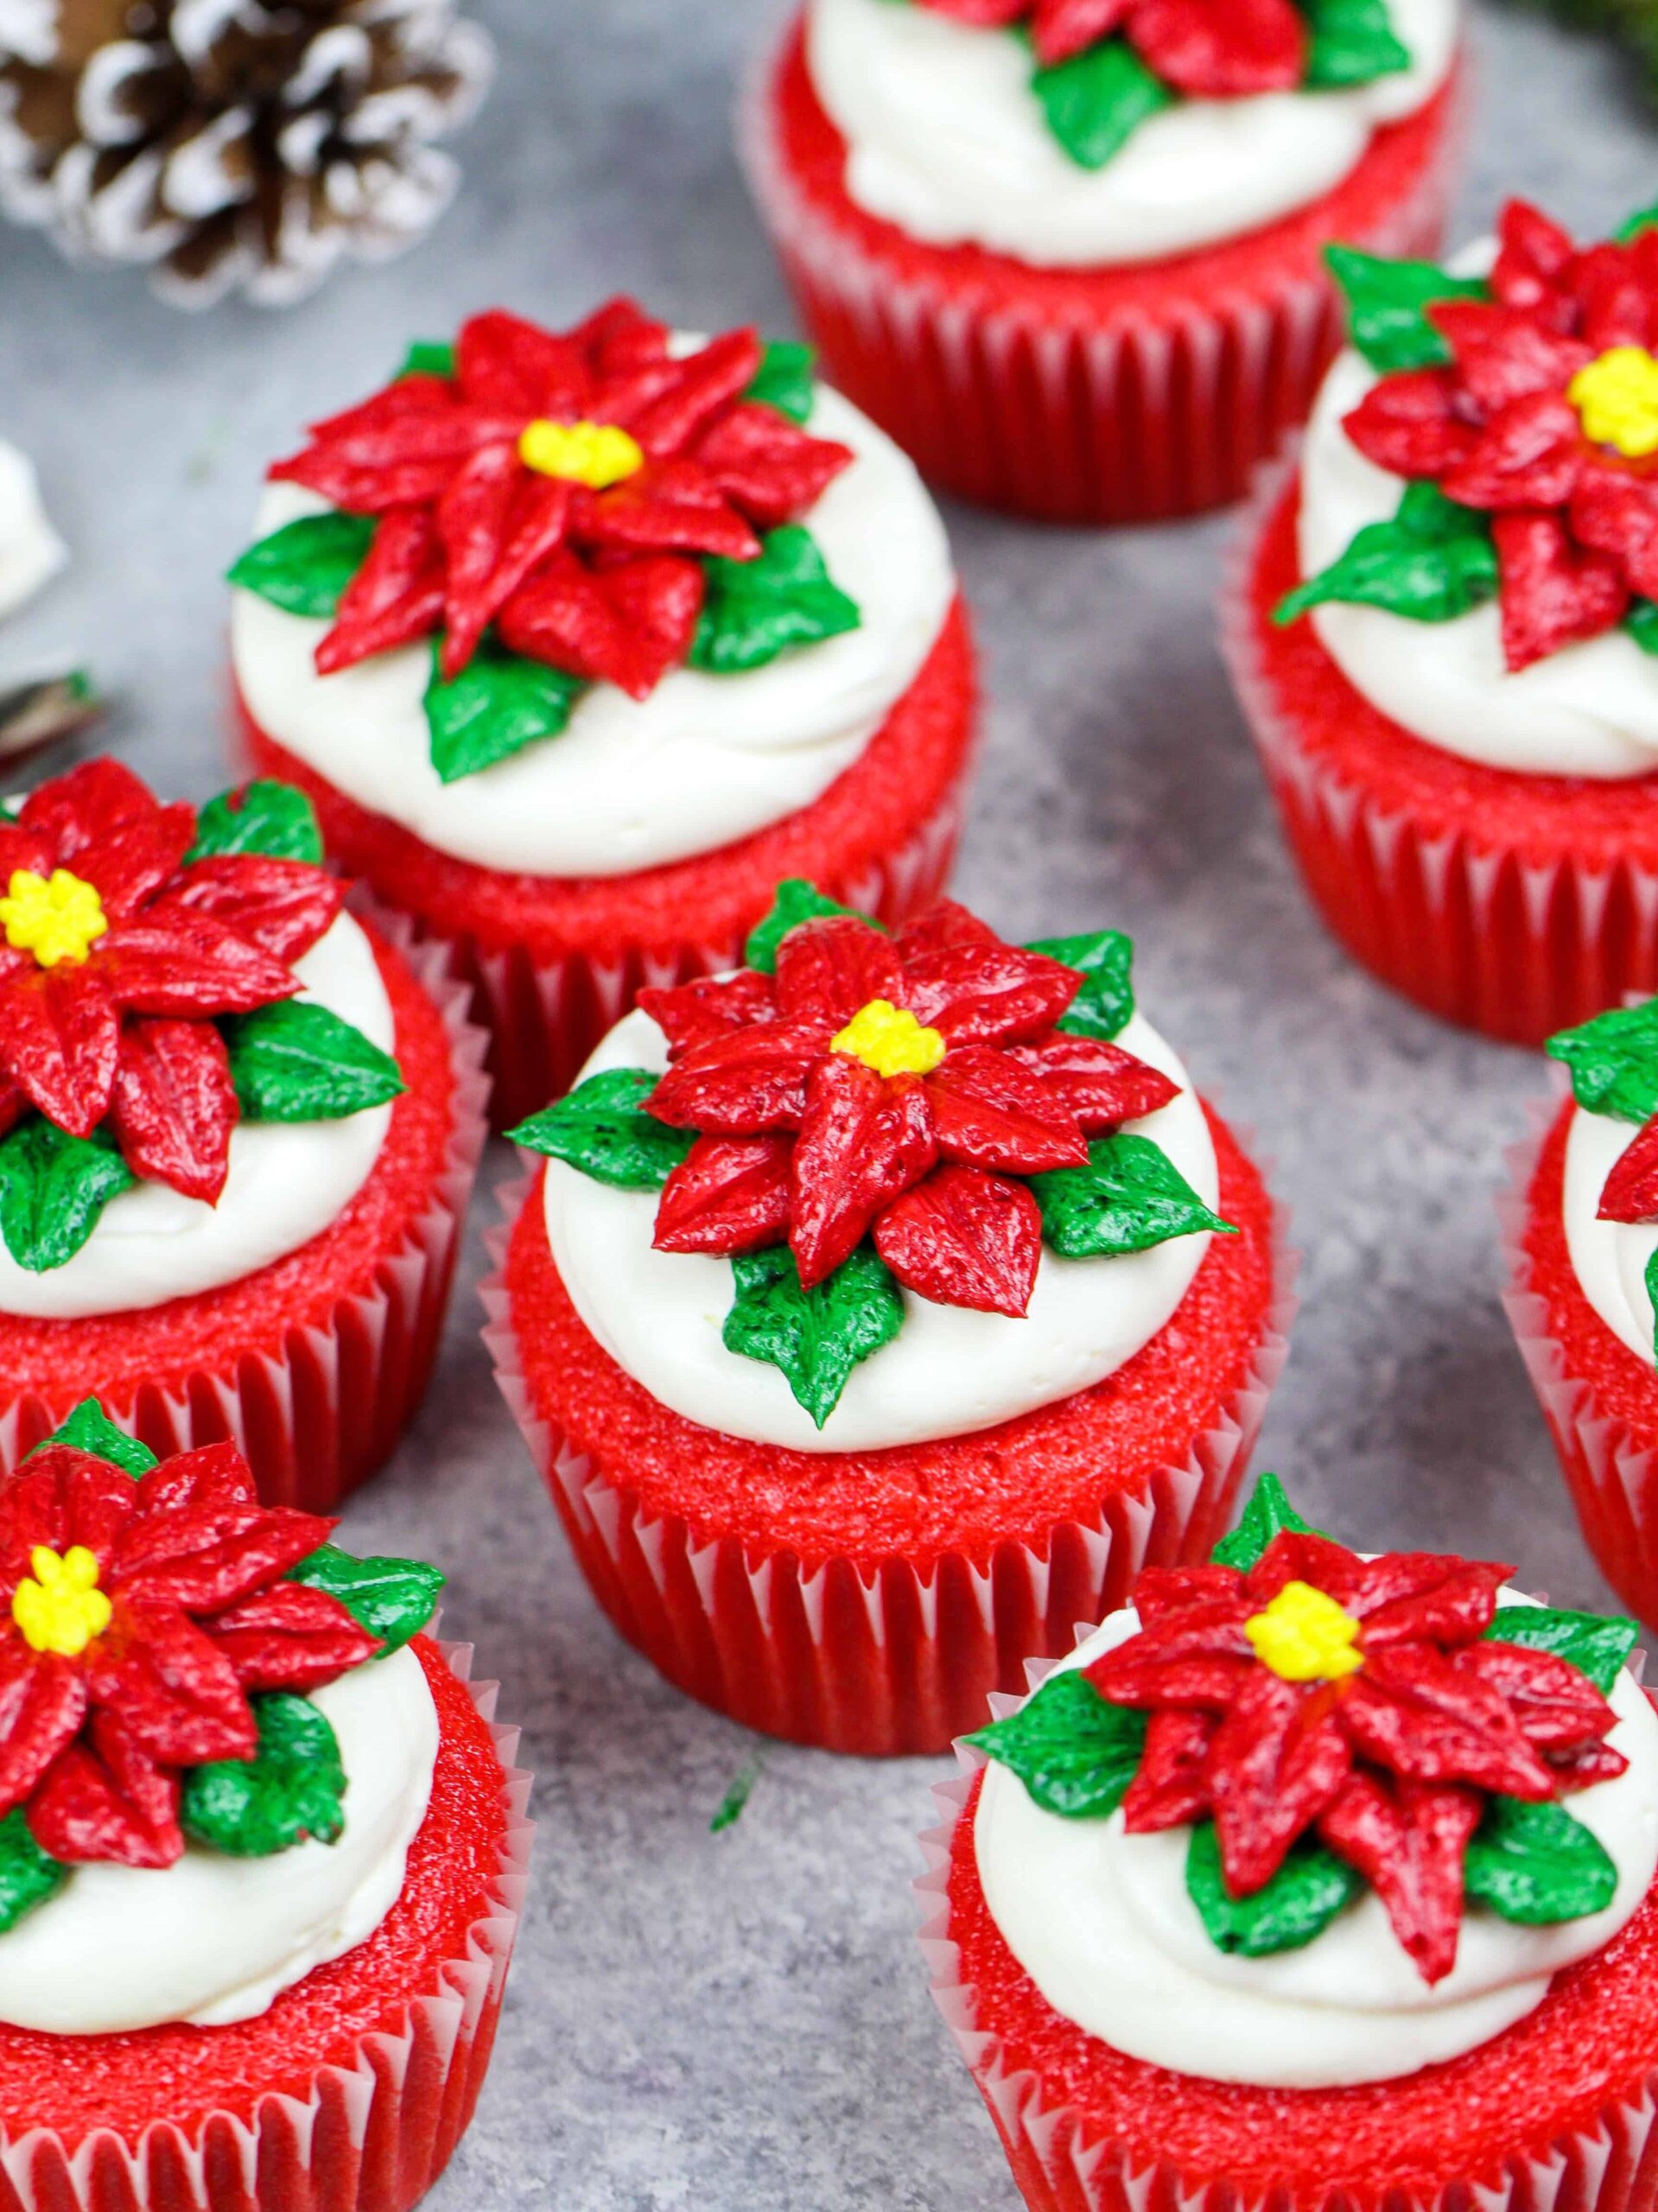 image of poinsettia cupcakes placed on a festive red cake stand